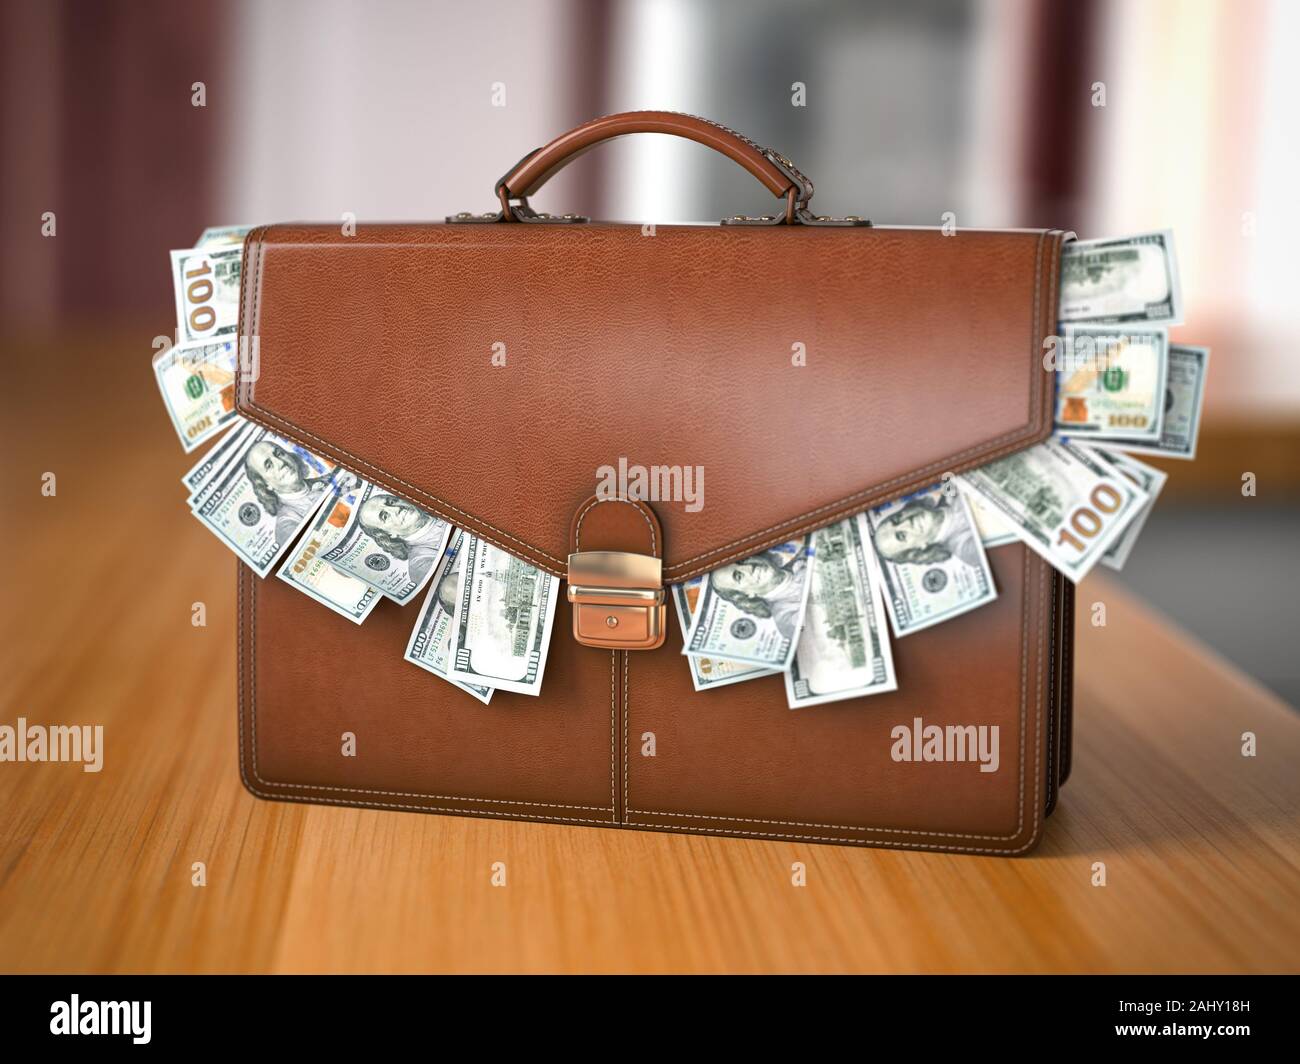 Briefcase full of dollars isolated on the table. Bribery, corruption, stock exchange portfolio financial concept. 3d illustration. Stock Photo